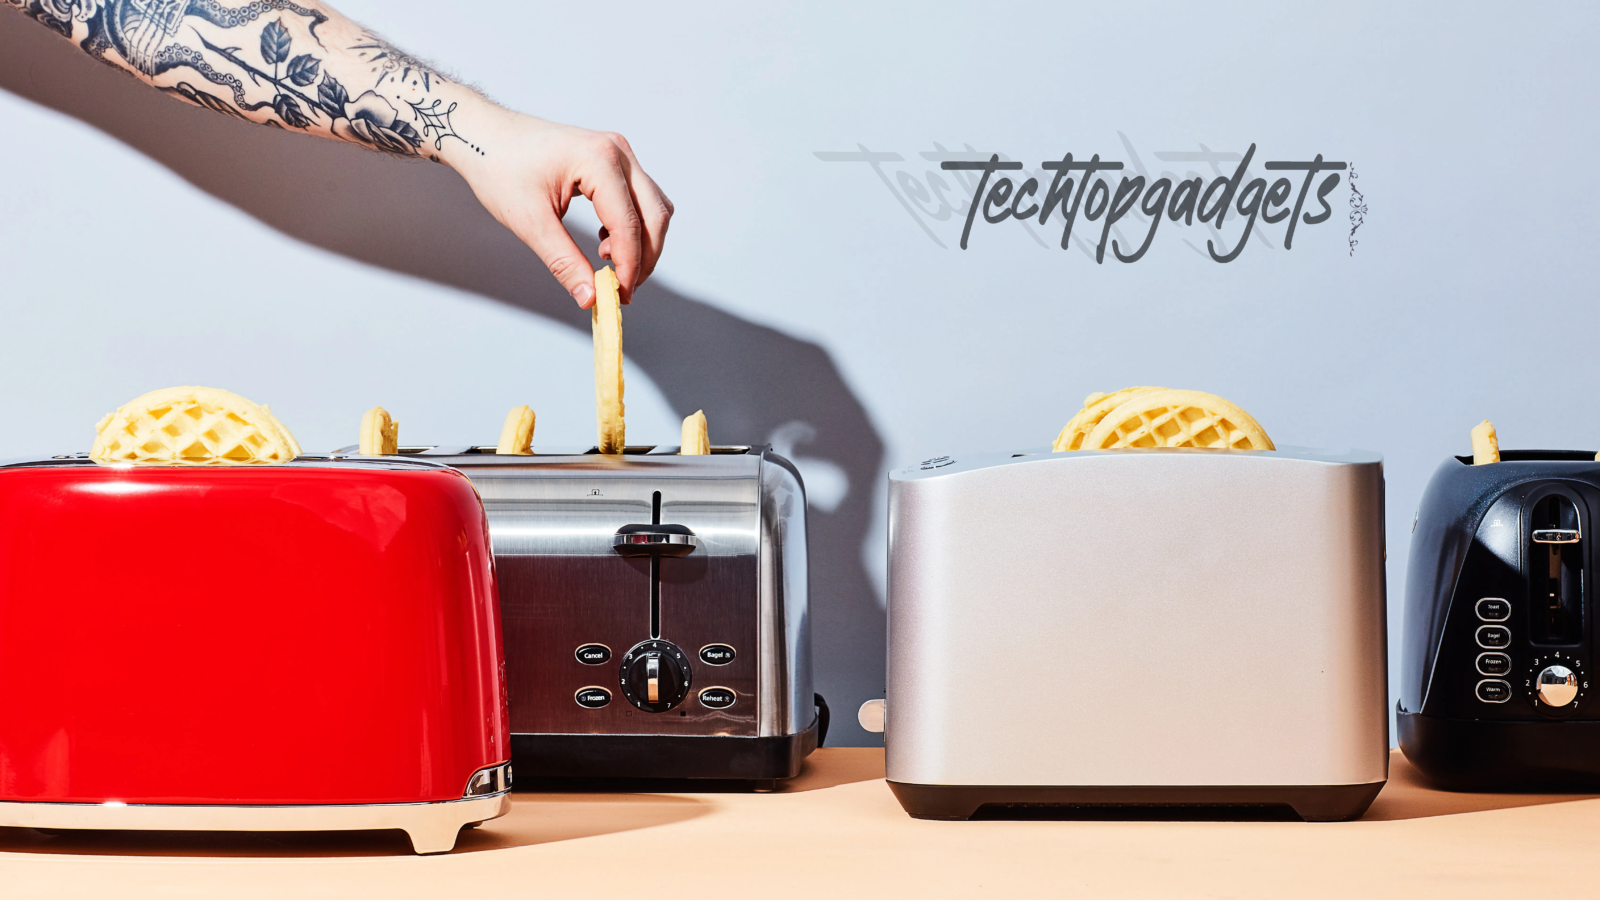 Various models of the best affordable toasters are lined up with a person inserting toast, demonstrating a comparison of toasting capabilities and styles for the ideal breakfast experience.